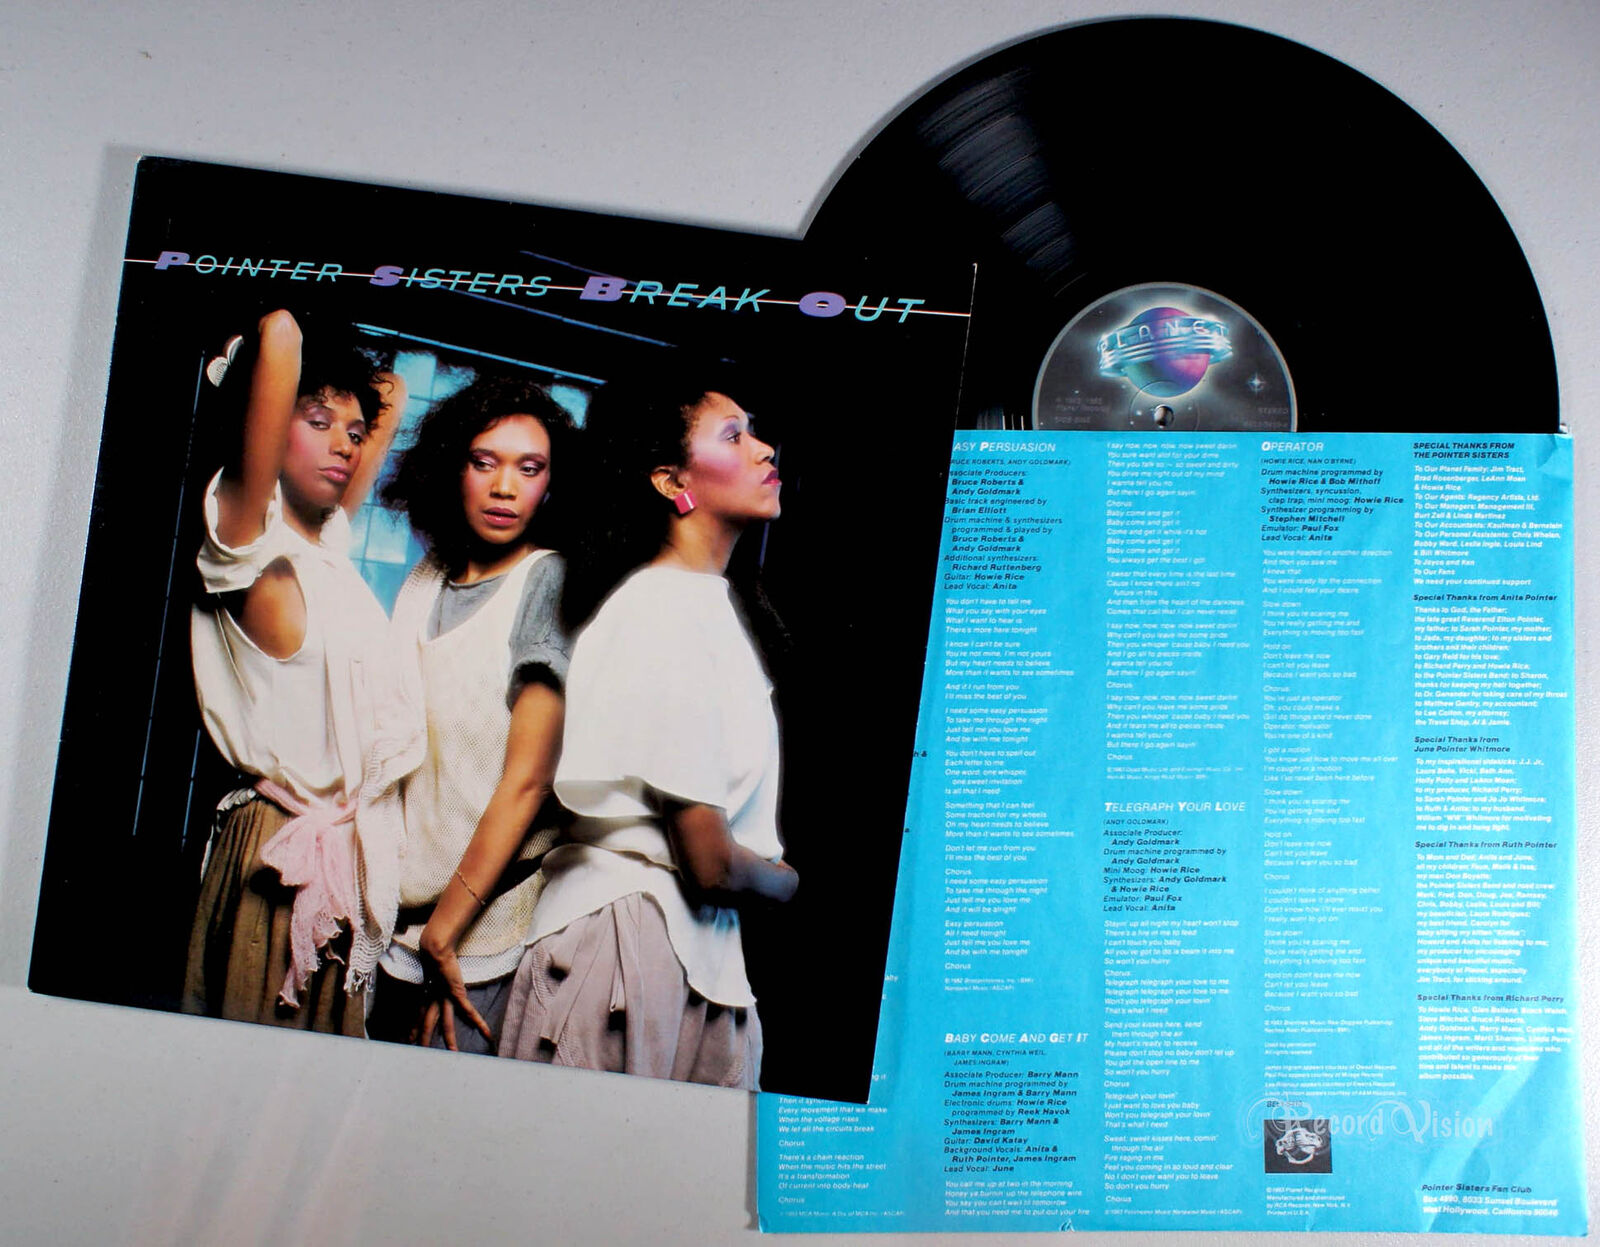 Pointer Sisters - Break Out (1983) Vinyl LP • Jump, Automatic, I\'m So Excited